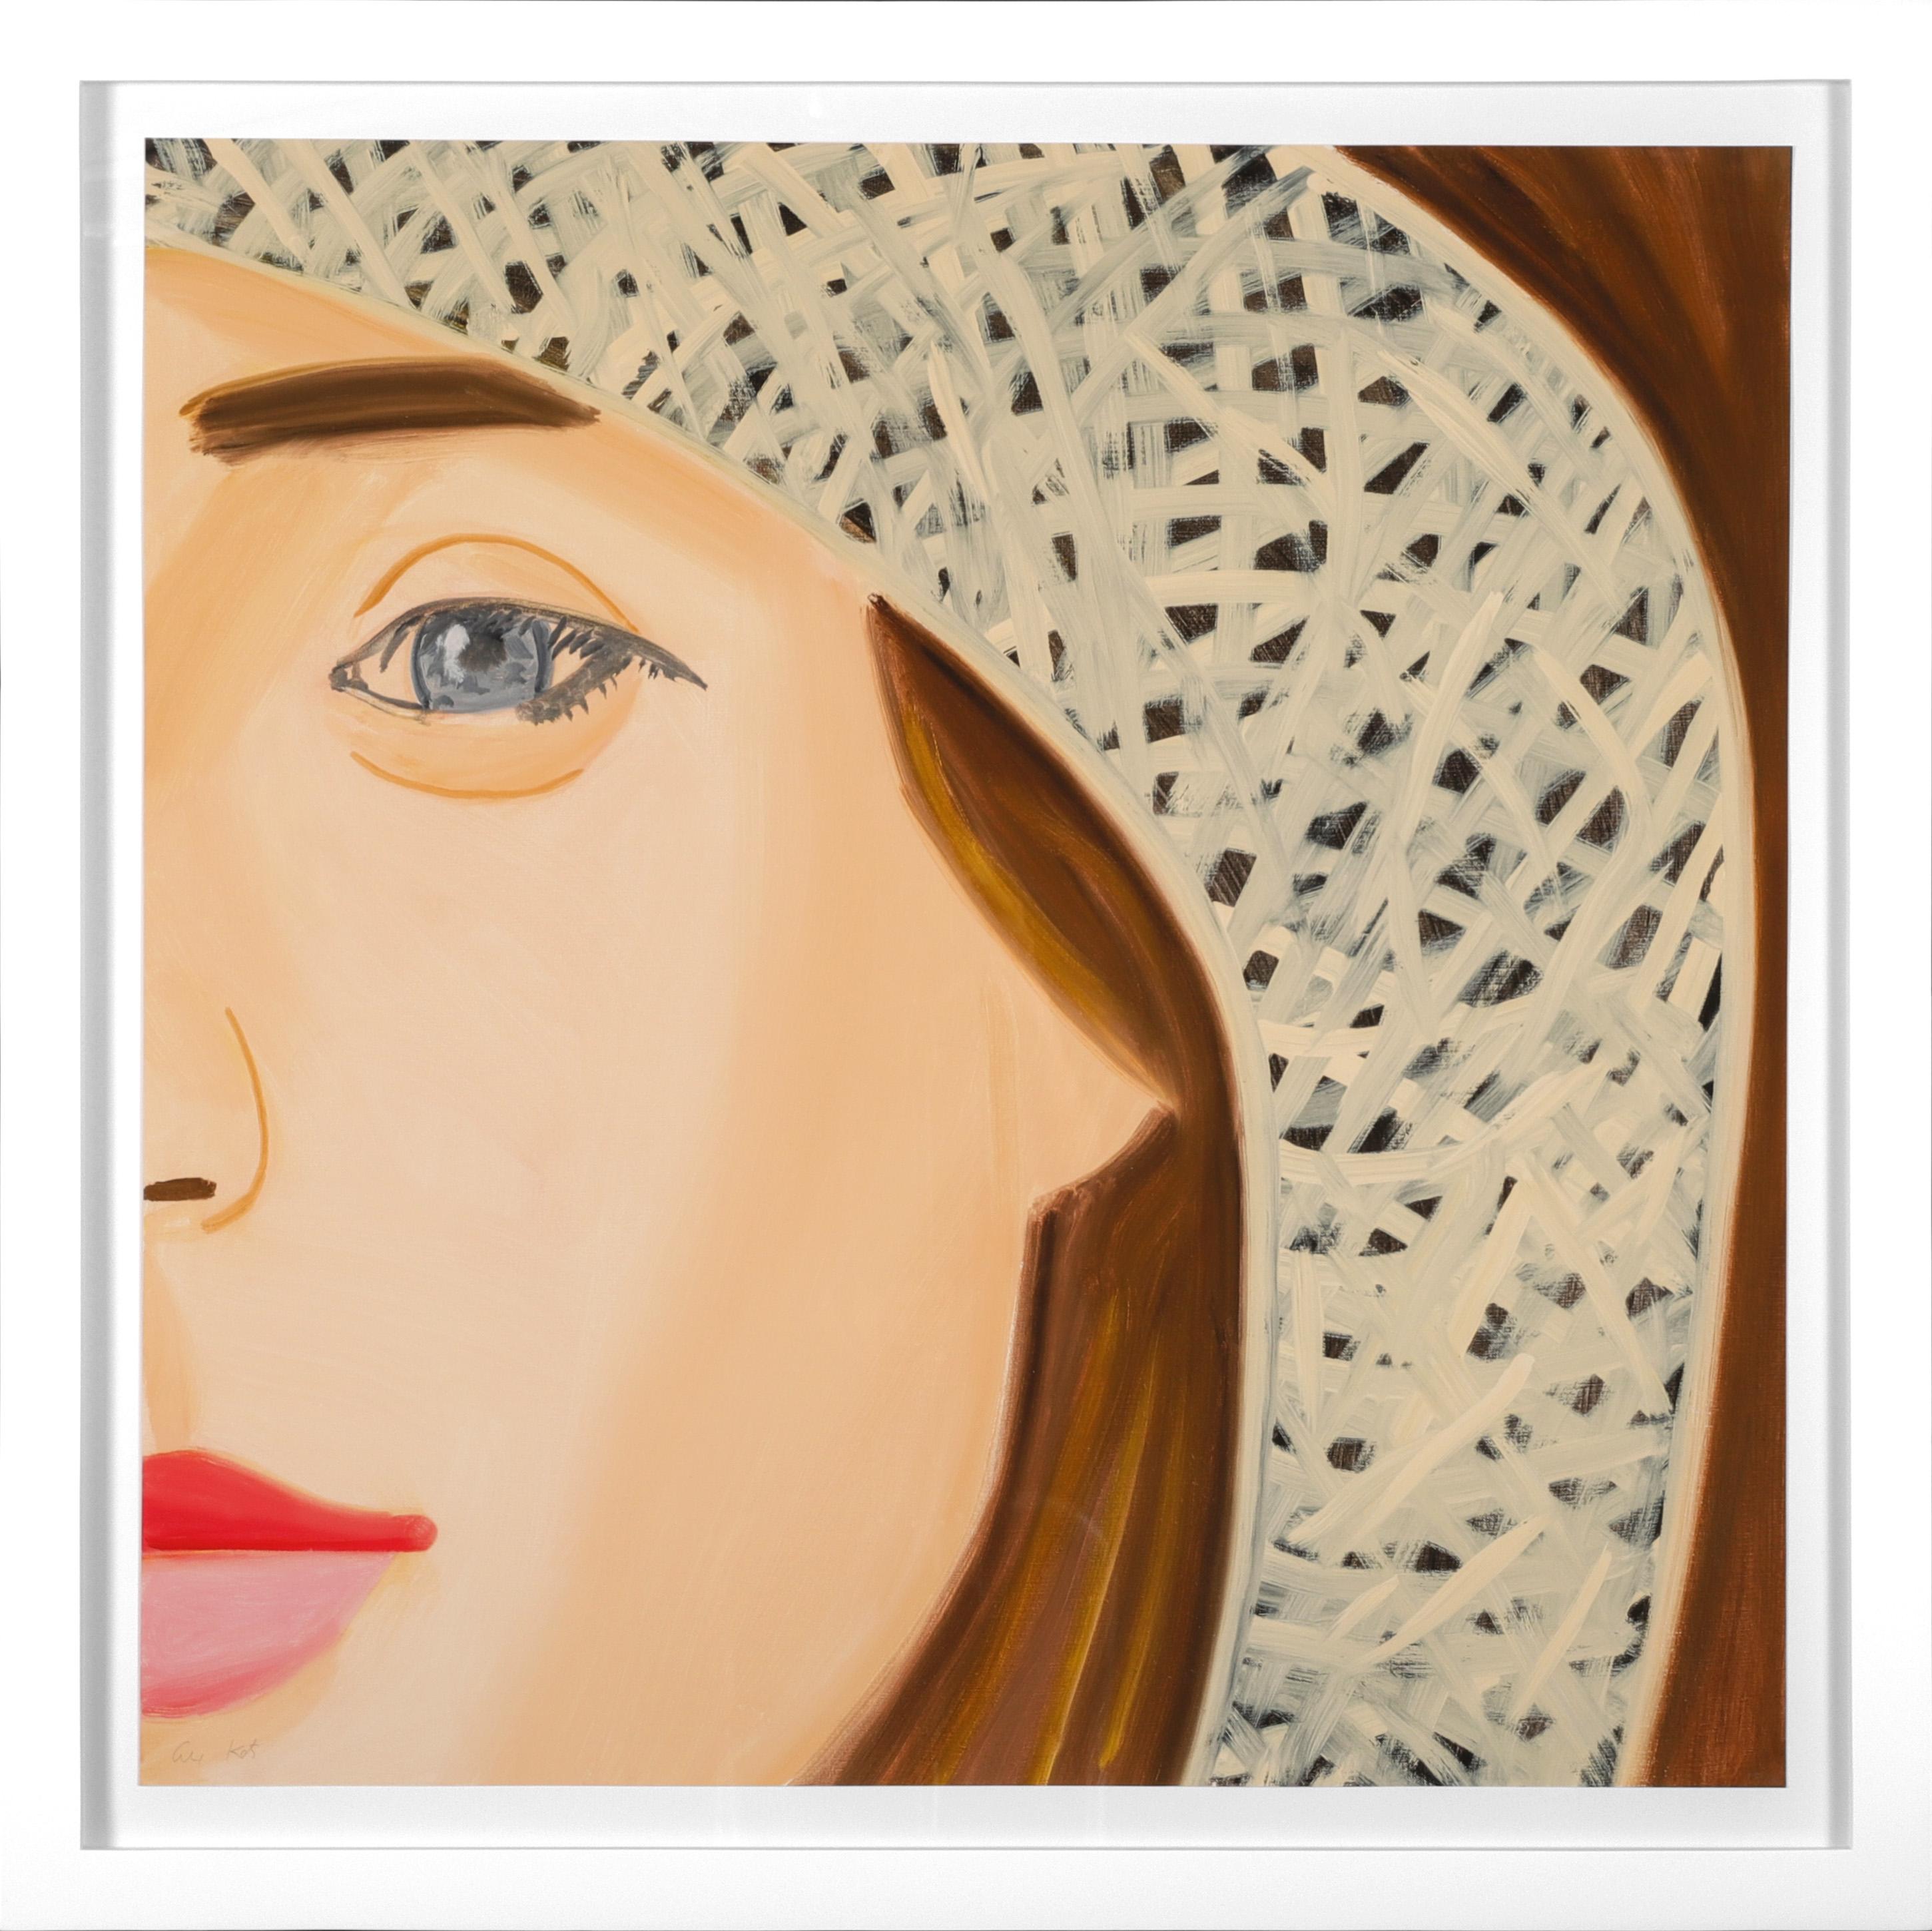 'Straw Hat I' by Alex Katz is an archival pigment ink print on Innova Etching Cotton Rag 315 gsm fine art paper. This lively work reflects Katz’s signature style, with bold and colorful two-dimensional strokes and ‘up close’ portraiture. Katz’s work